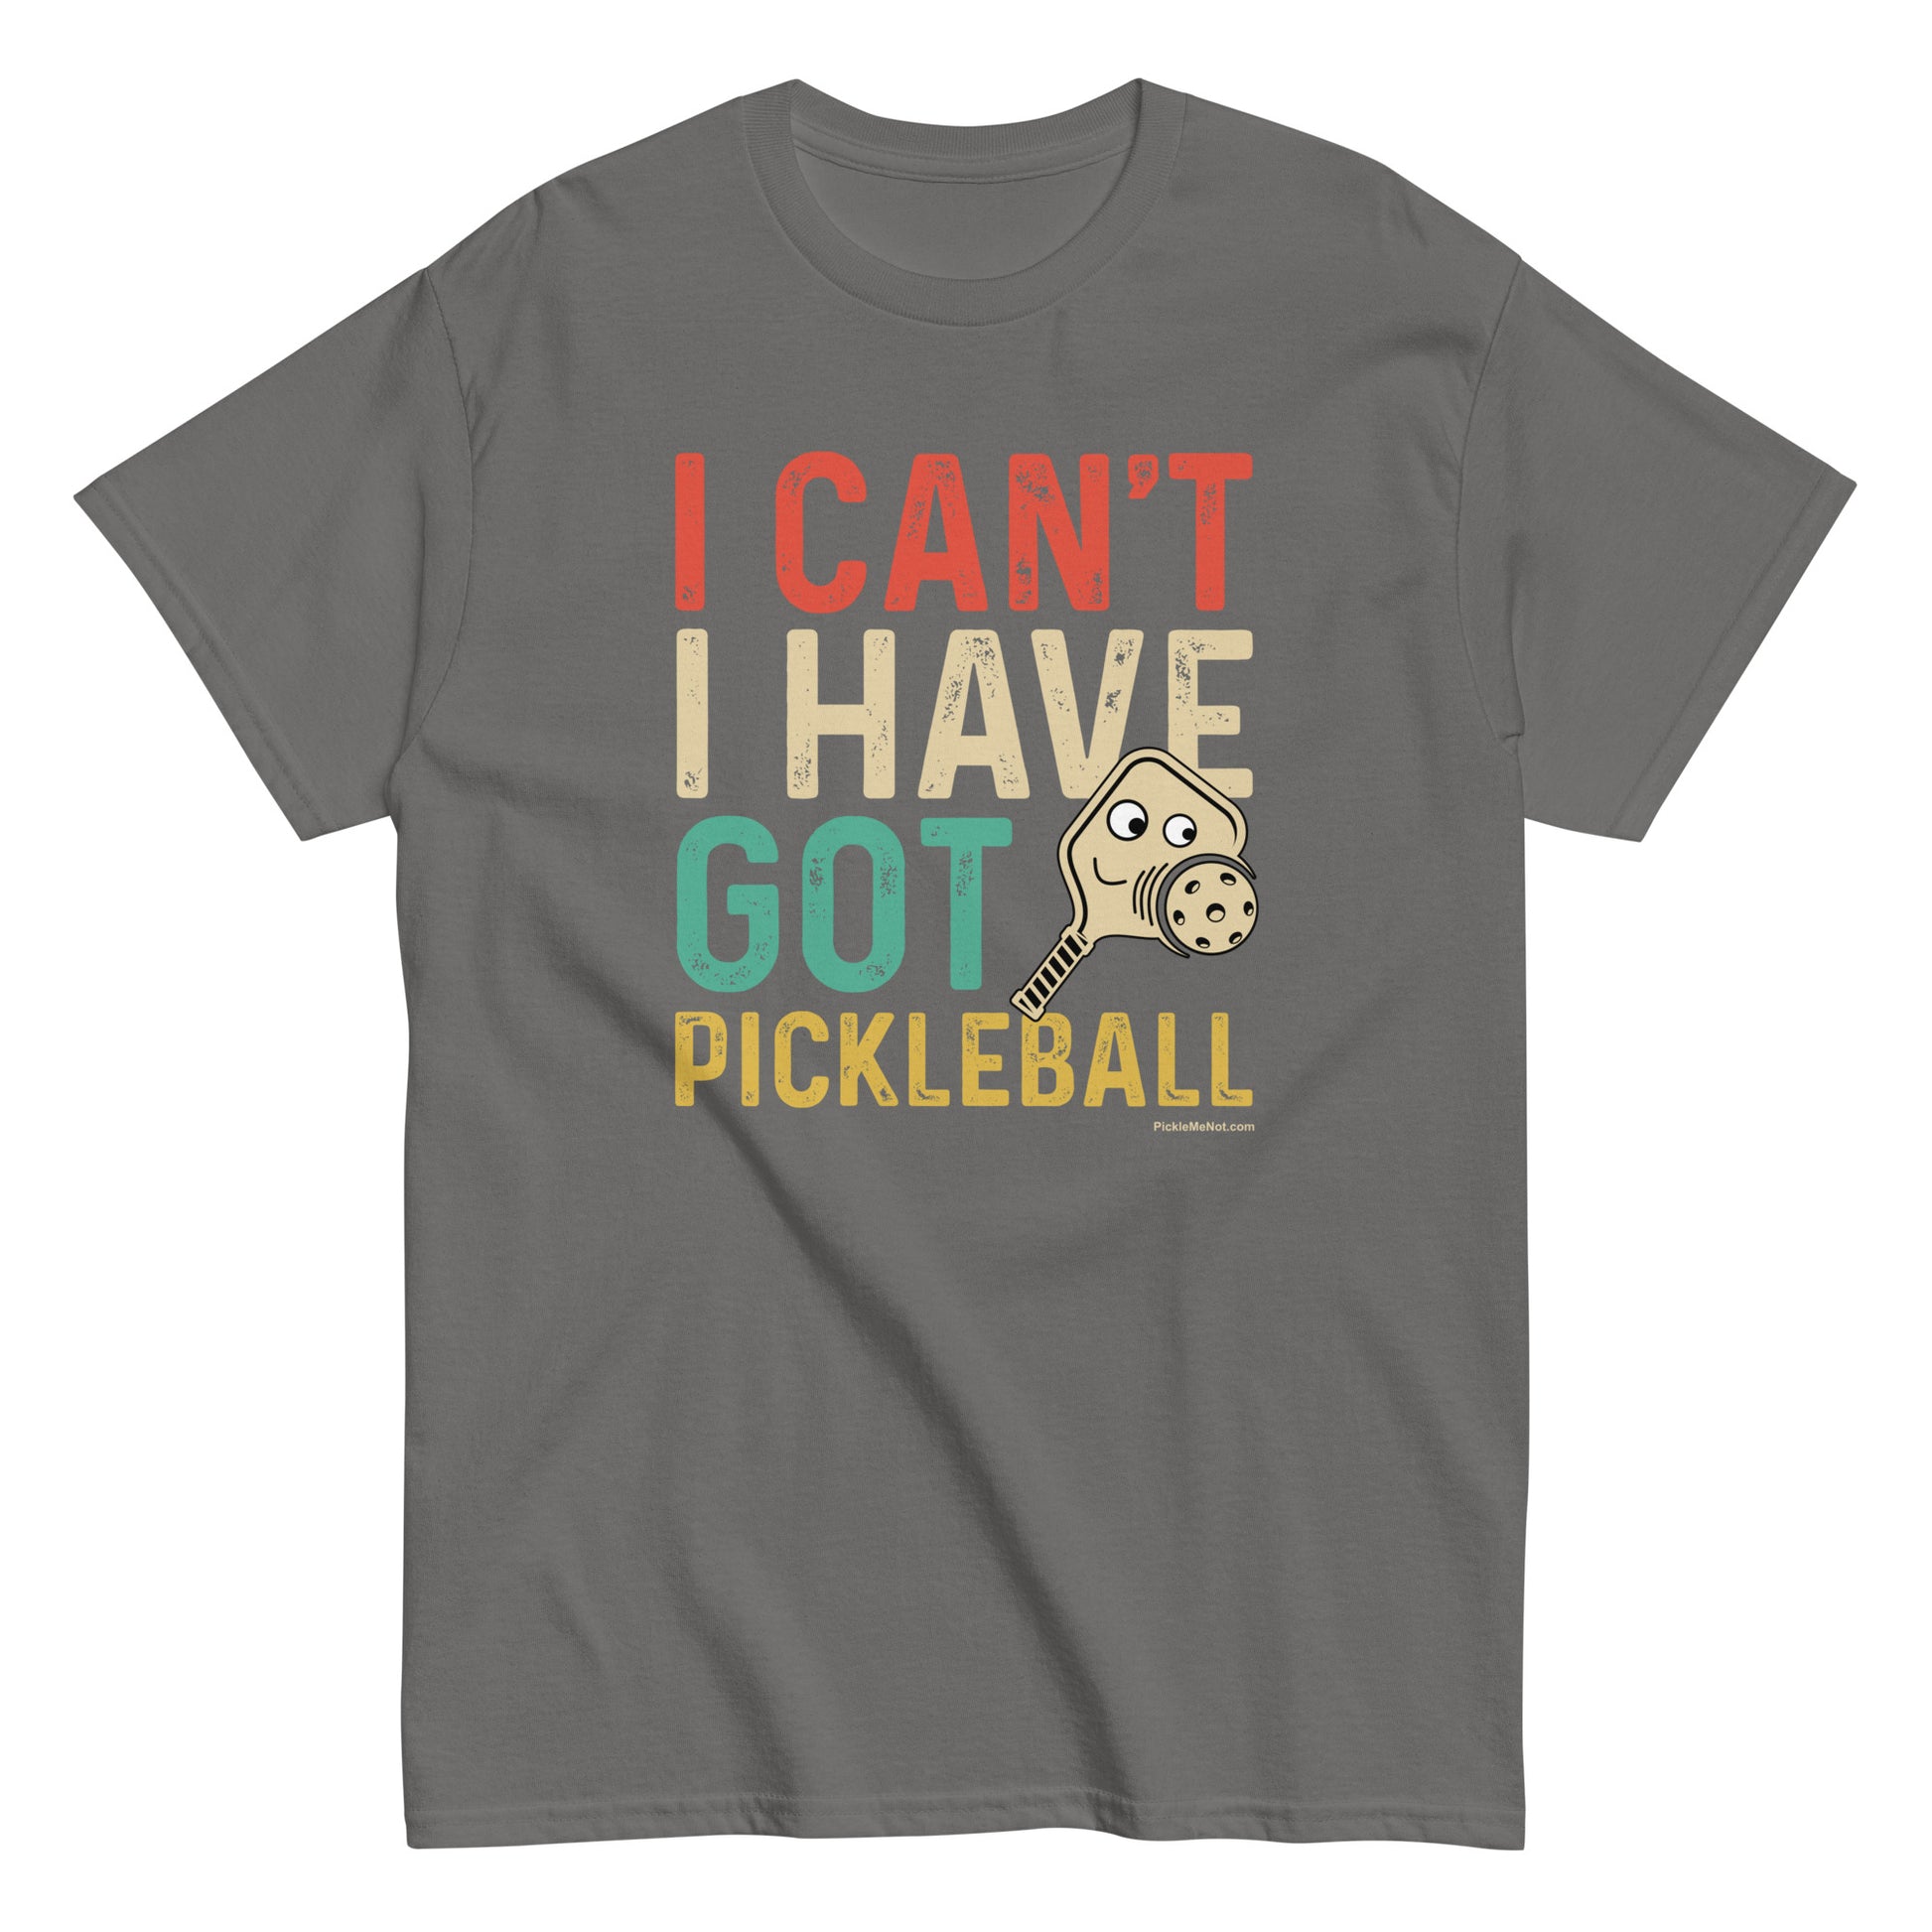 Fun Distressed Pickleball, "I Can't, I Have Pickleball" Men's Classic Charcoal Tee